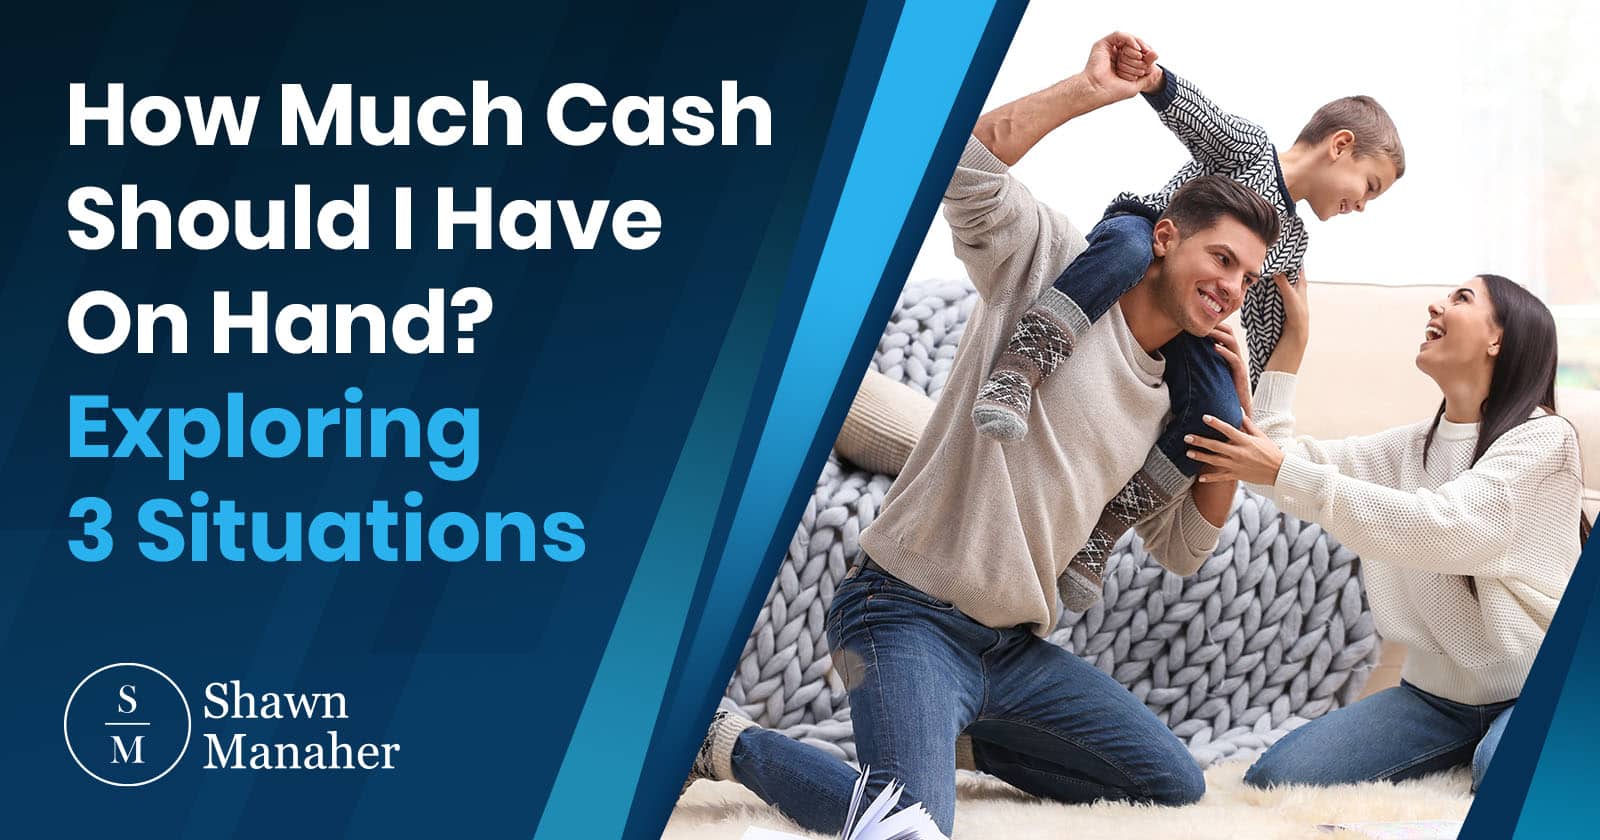 How Much Cash Should I Have On Hand? Exploring 3 Situations